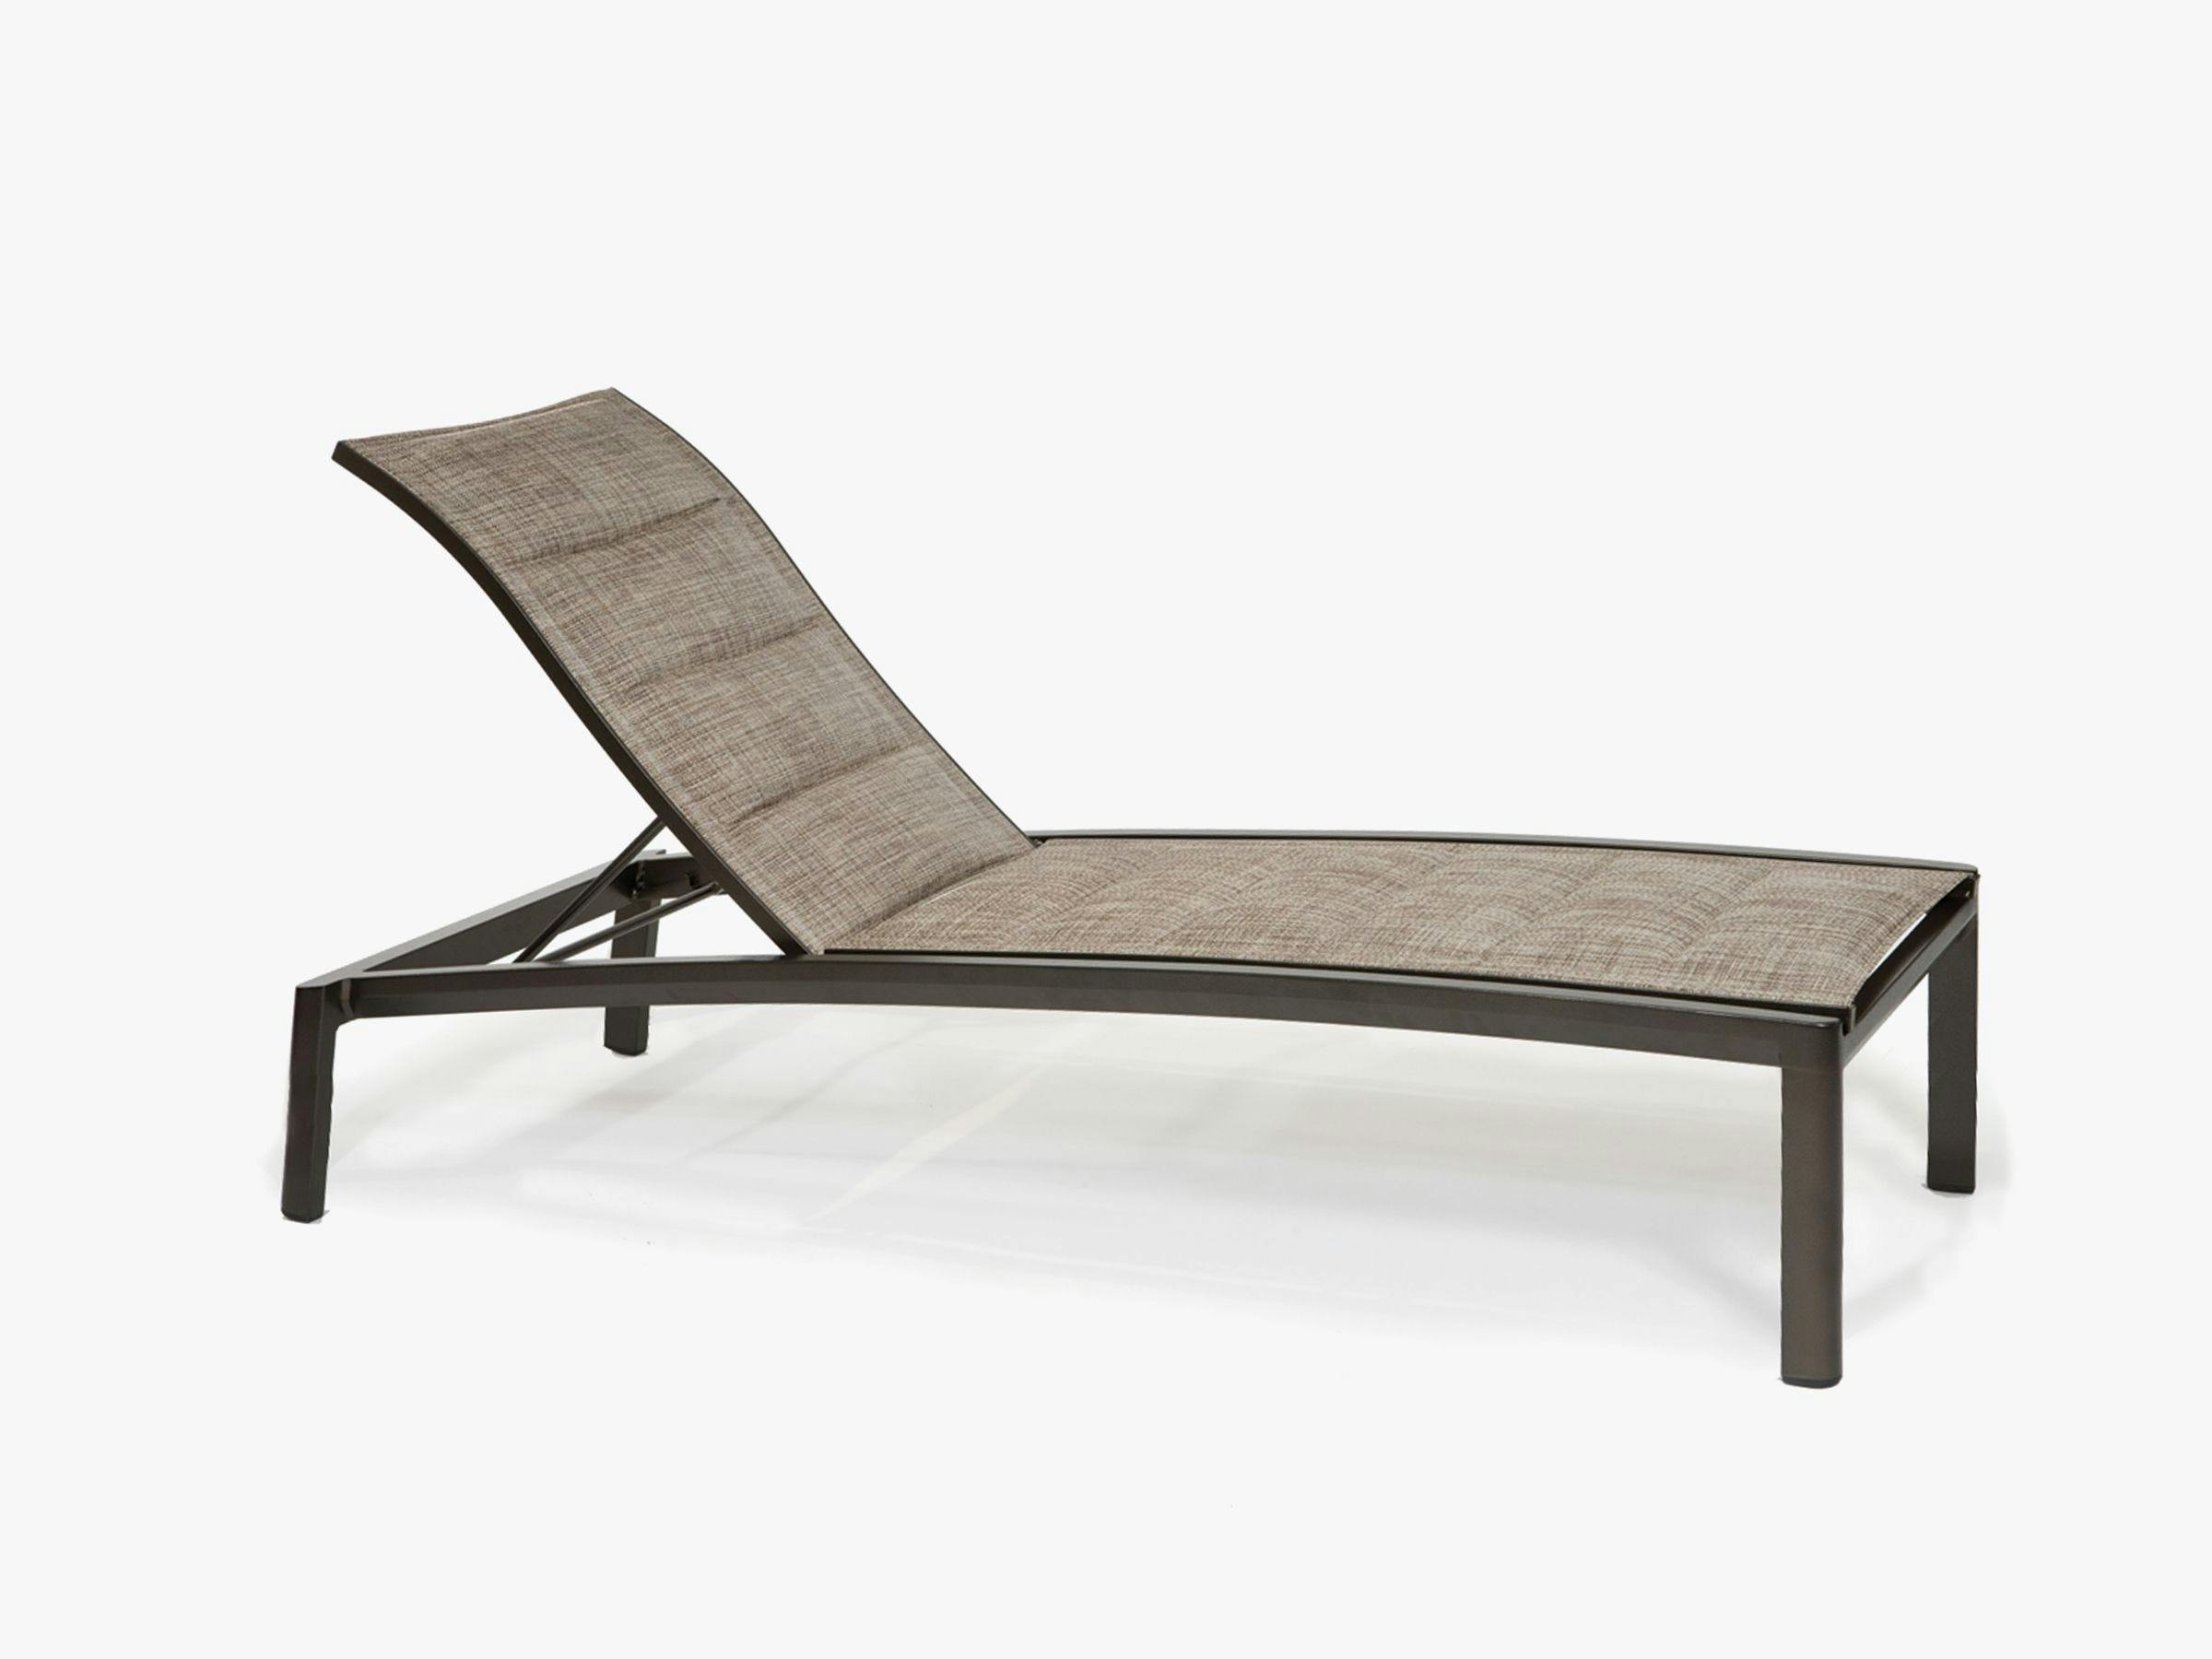 Vision Padded Sling Elevated Nesting Sling Chaise Lounge